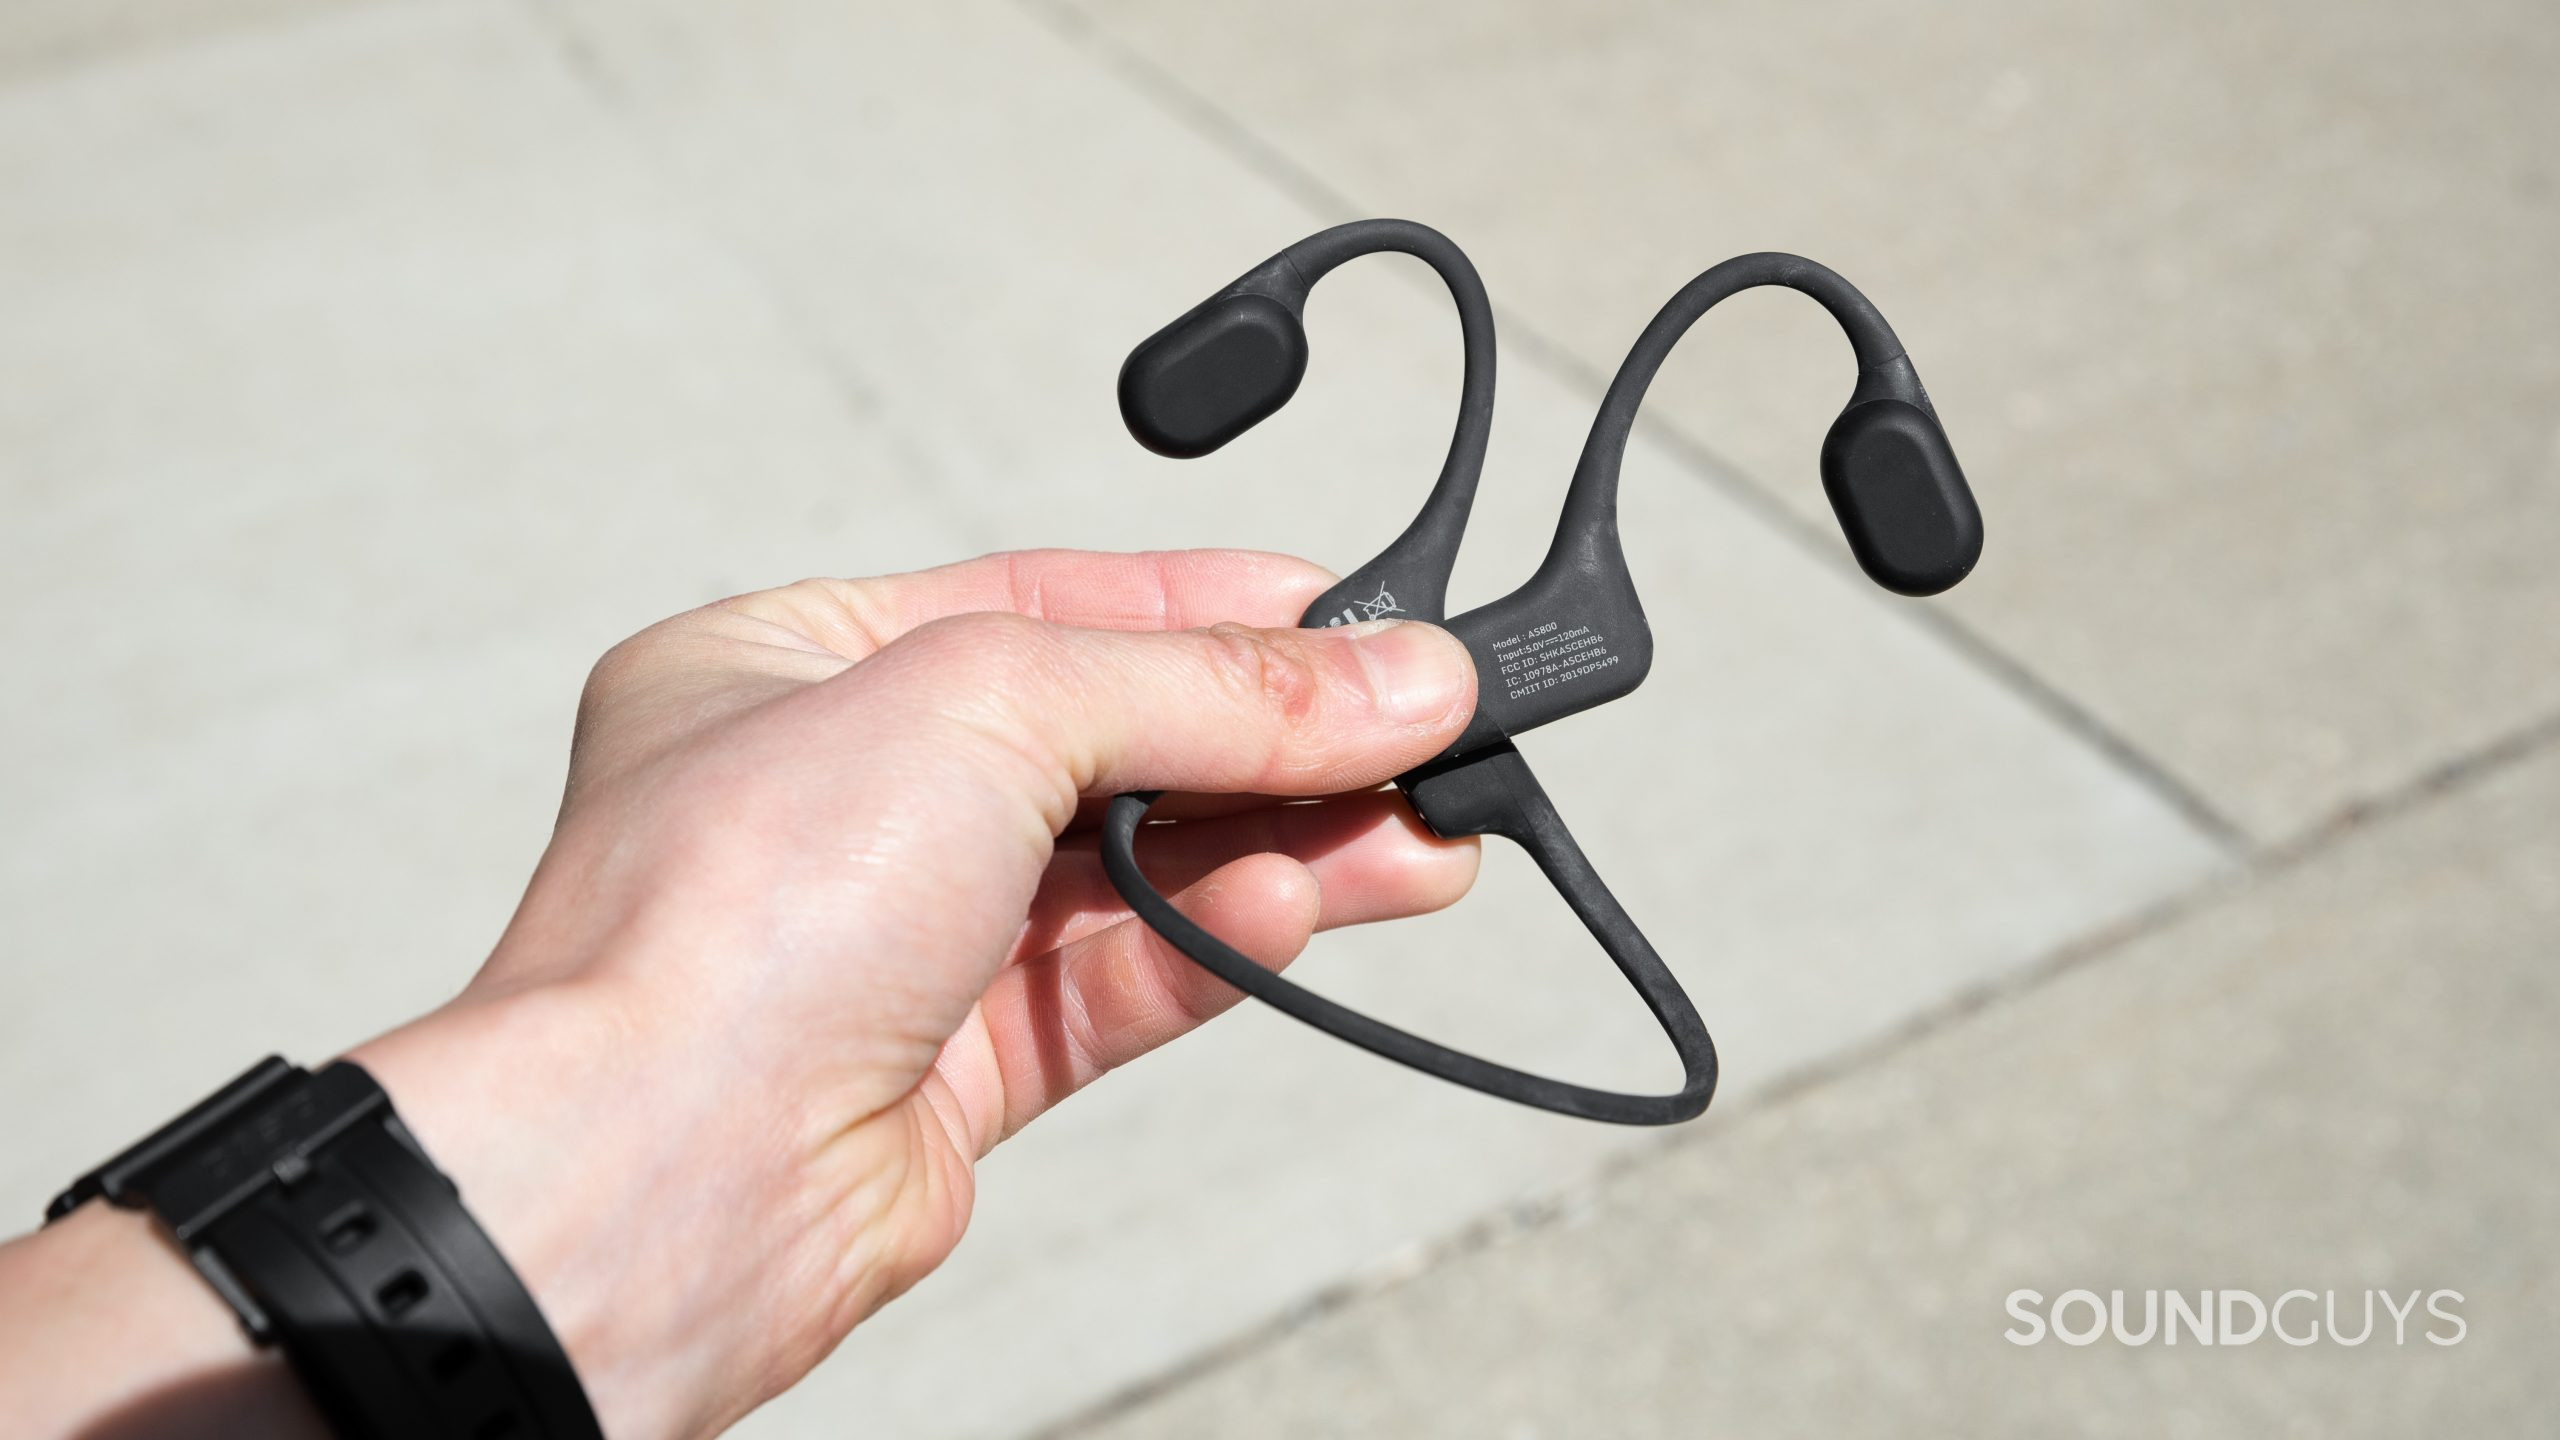 A hand holds the Aftershokz Aeropex bone conduction headphones to show the flat interior of each ear piece.